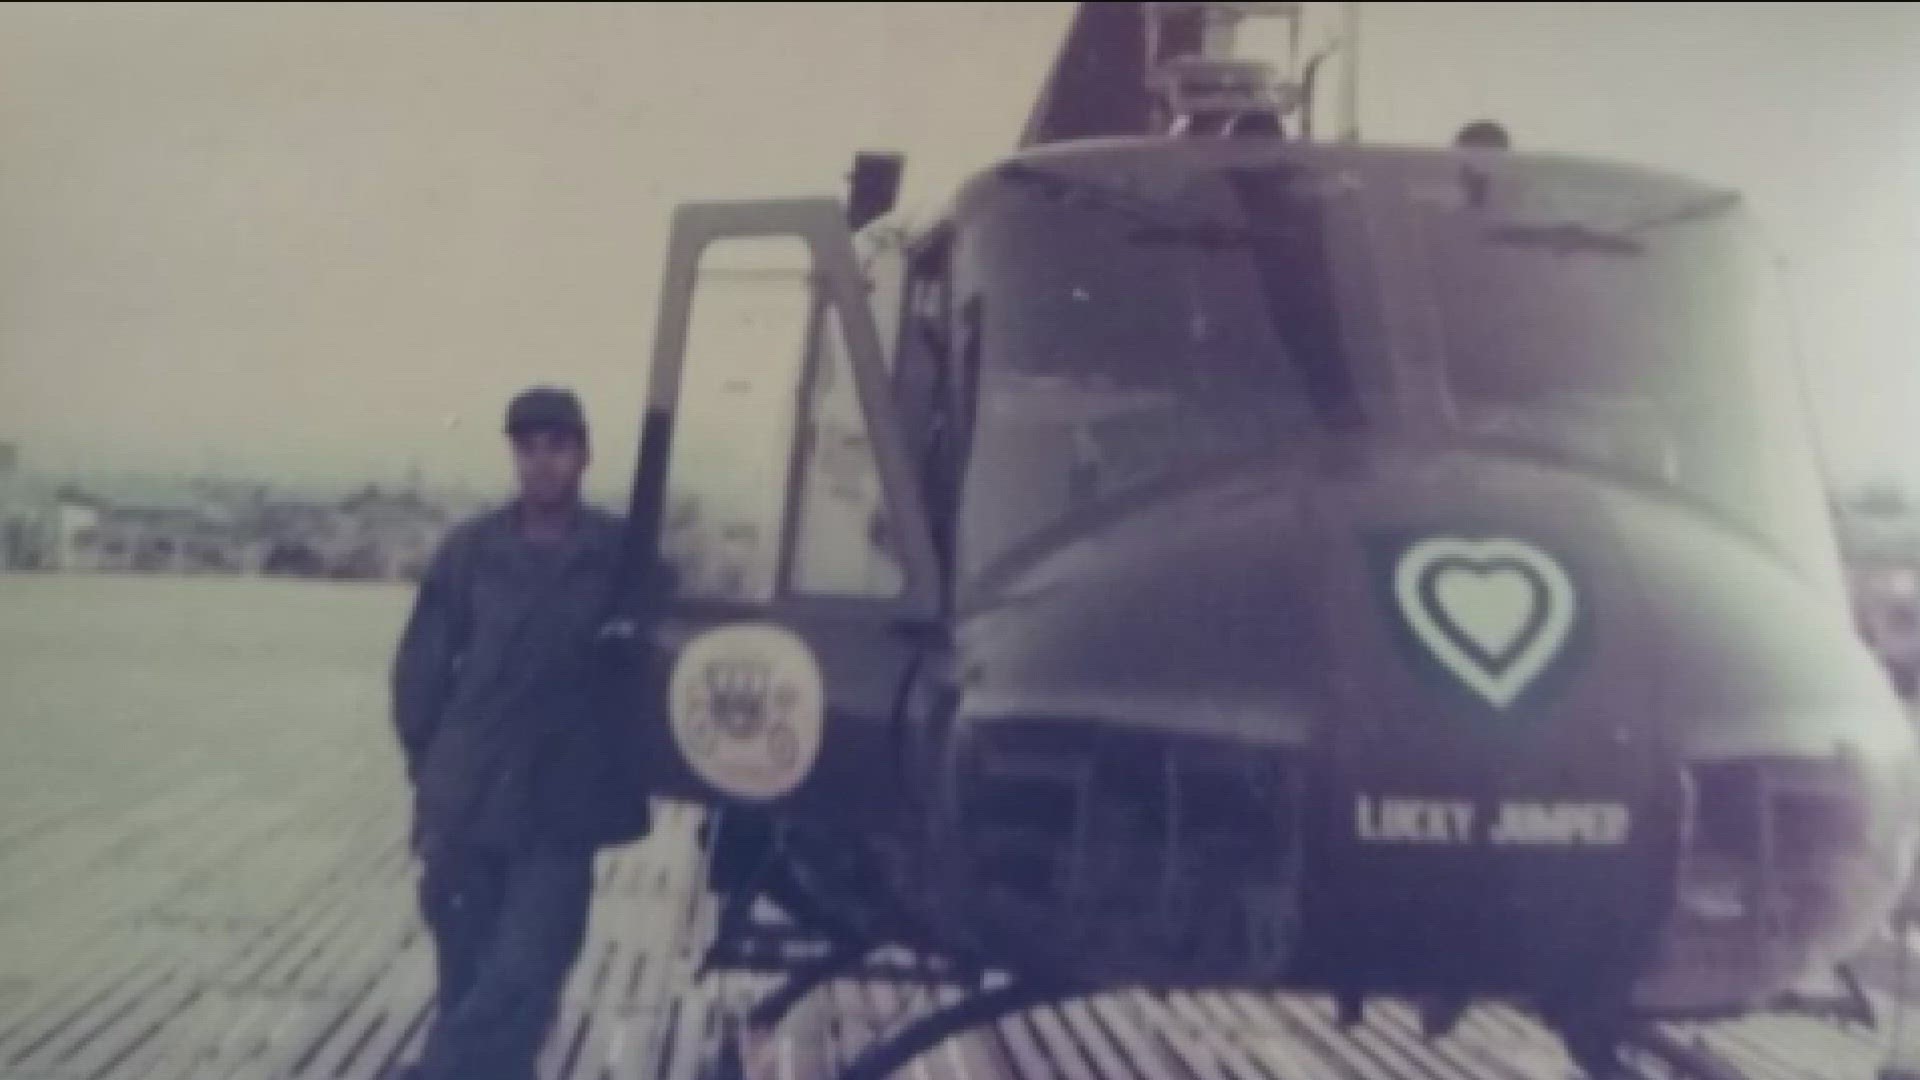 As a Black soldier, Jack Robinson said there were incidents between Black and white soldiers when he served. But he ensured that wasn't the case on his helicopter.